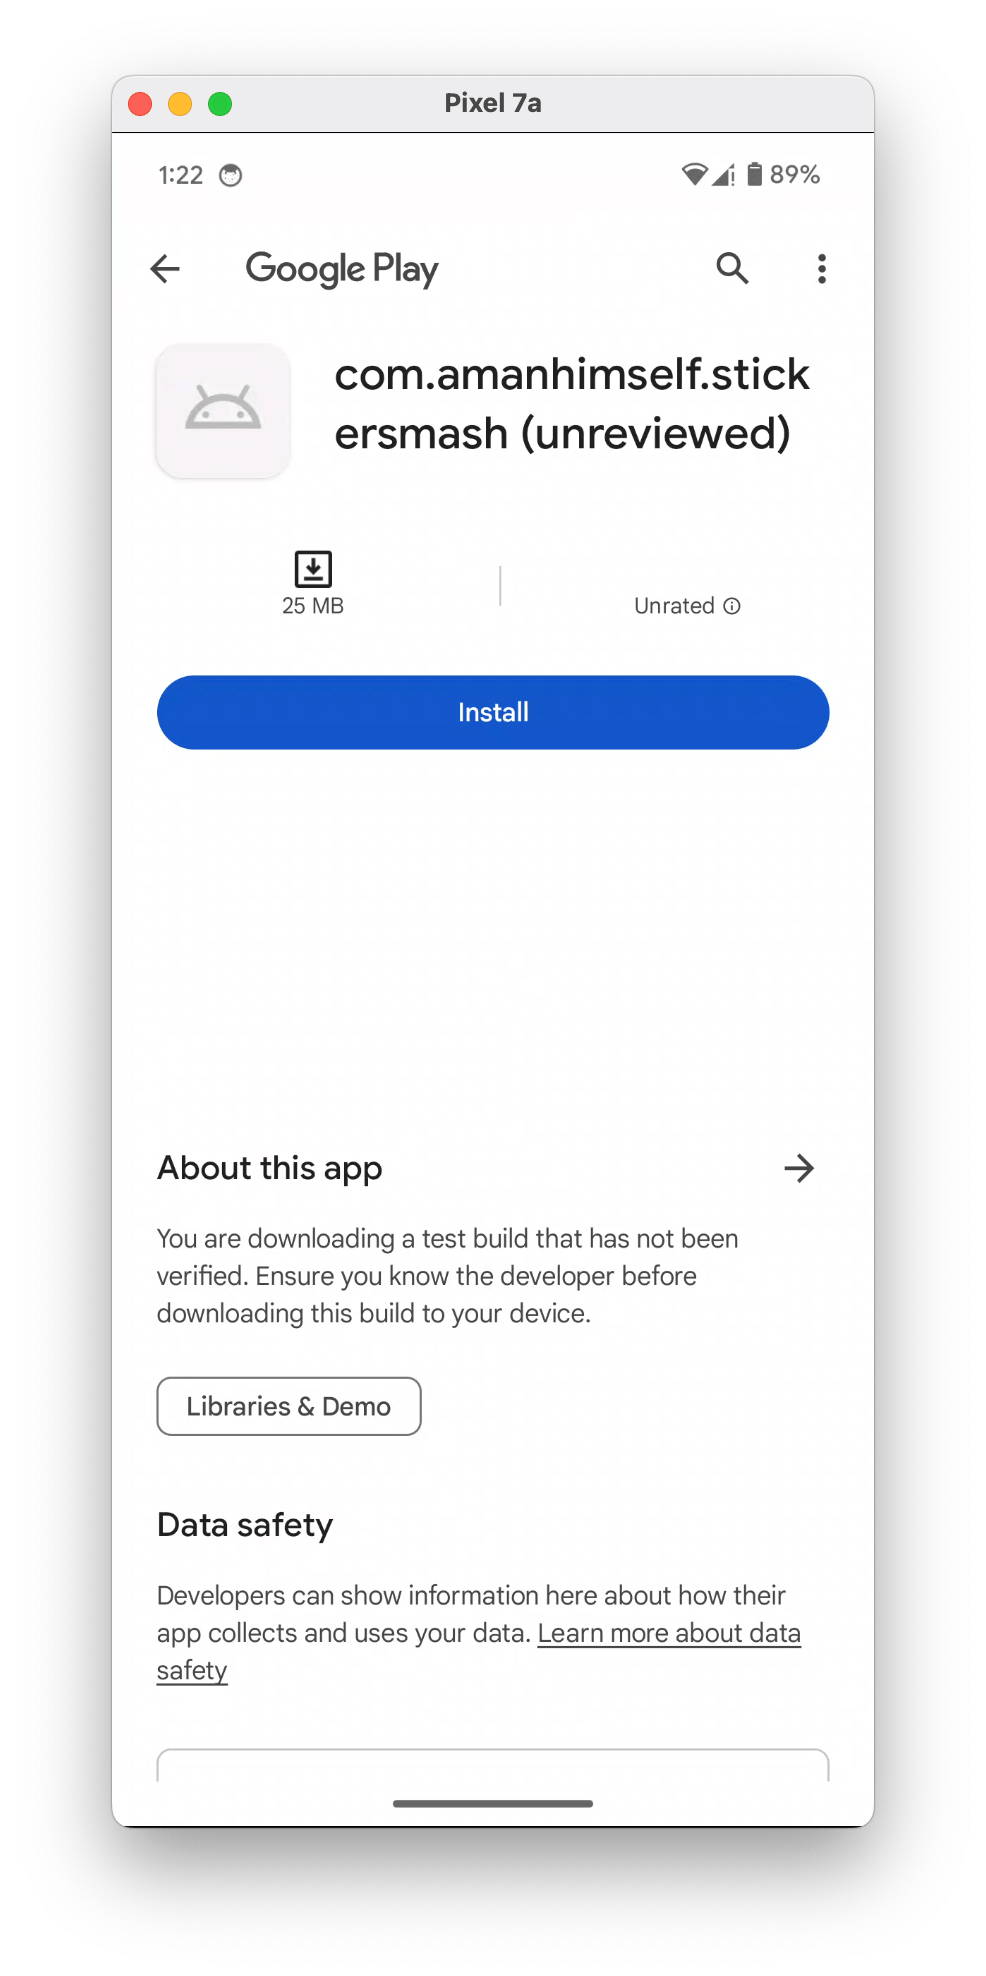 App installed on the device as an internal tester